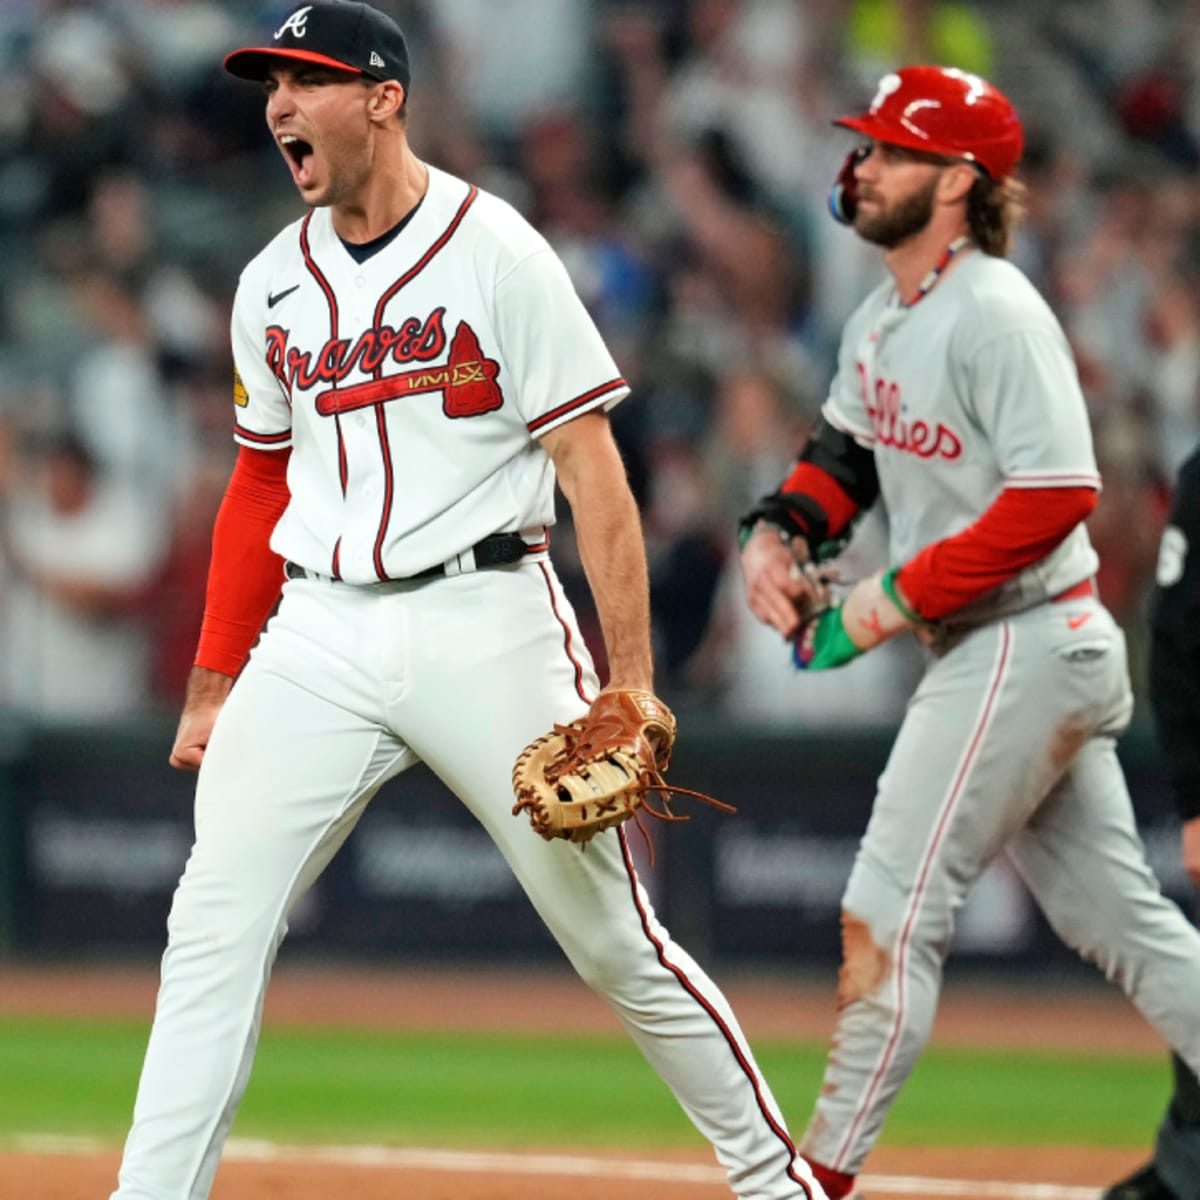 This Video of Braves' Game-Winning Double Play With Natural Sound